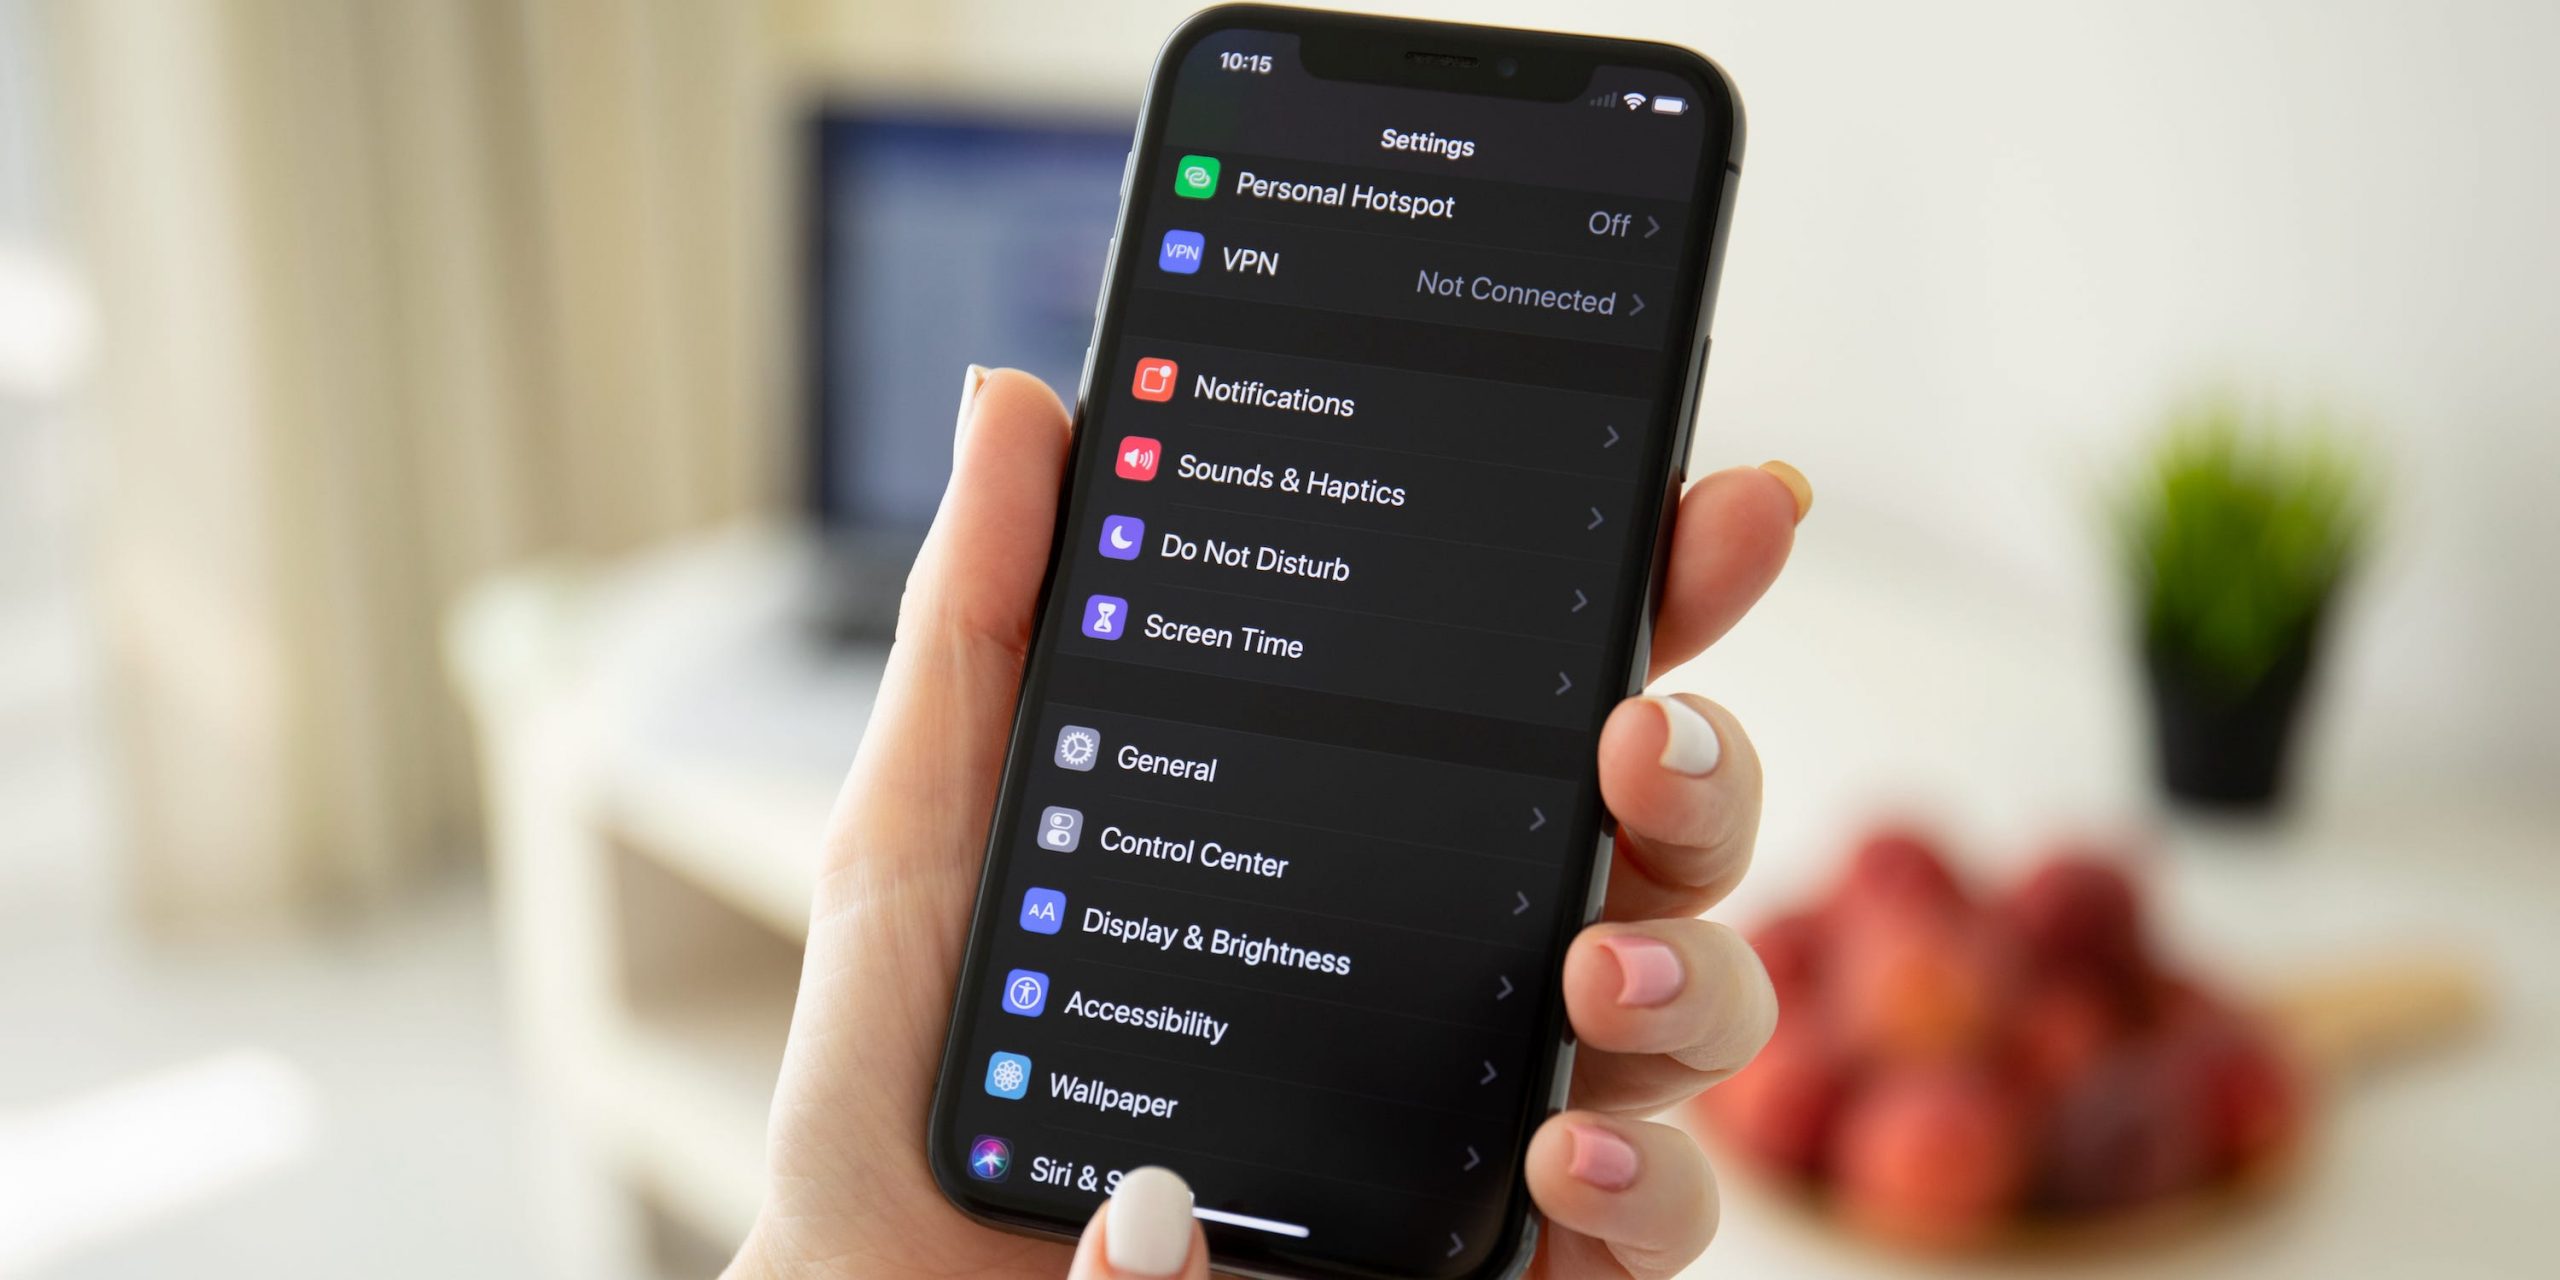 A person holding an iPhone. The iPhone is in Dark Mode, and the Settings app is opened.